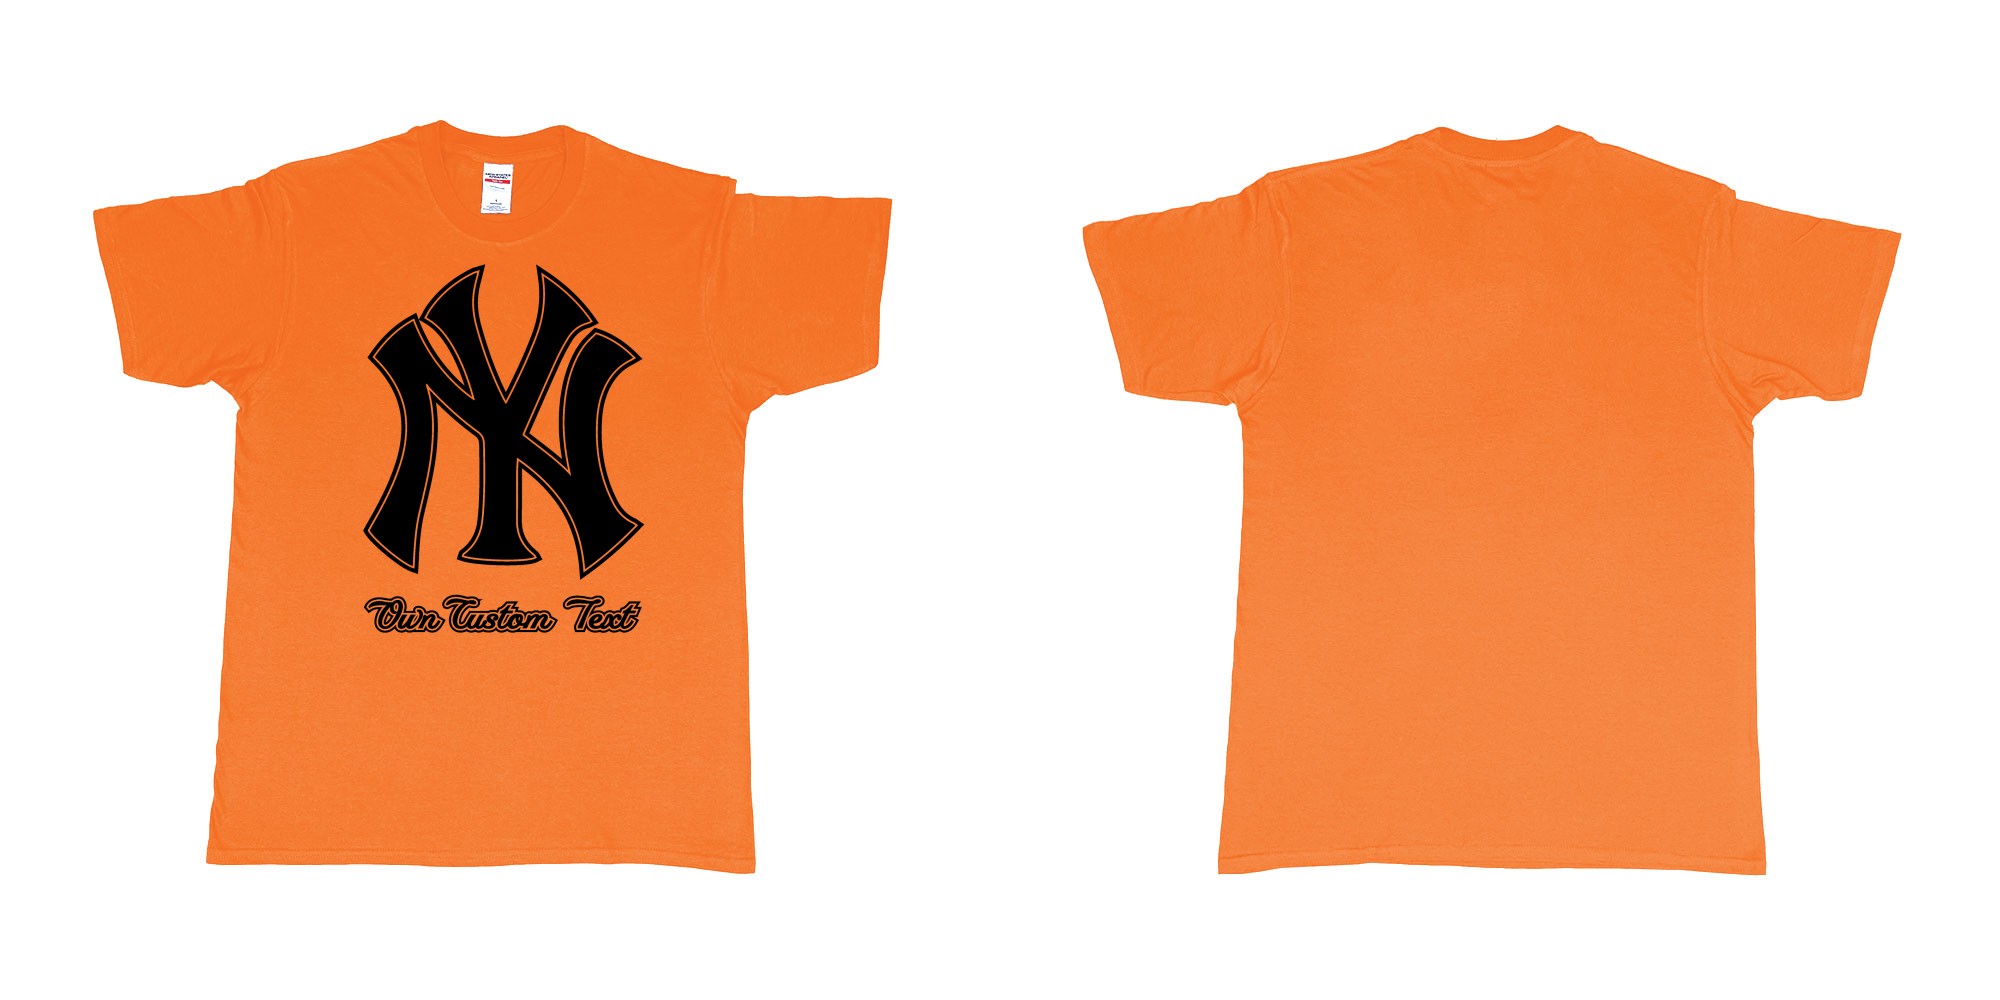 Custom tshirt design new york yankees baseball team custom design in fabric color orange choice your own text made in Bali by The Pirate Way